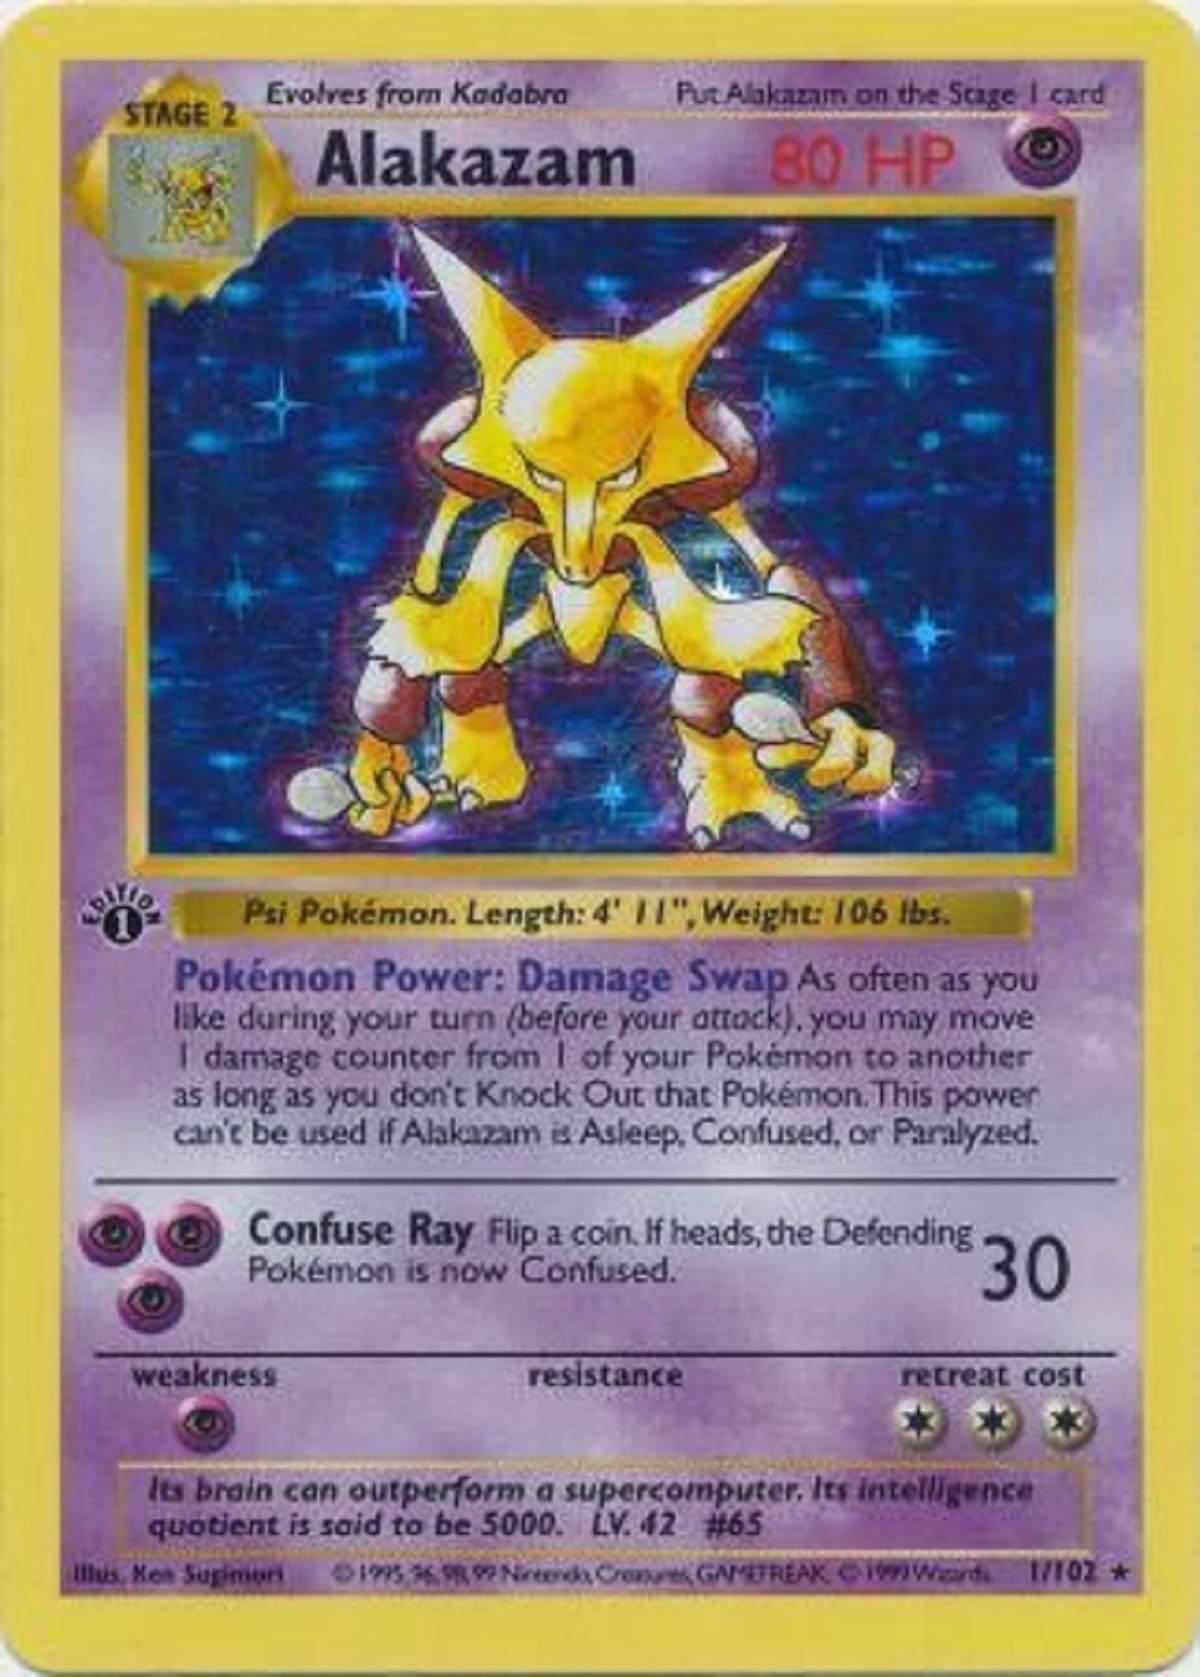 PokÃ©mon cards sells for over $100K at auction